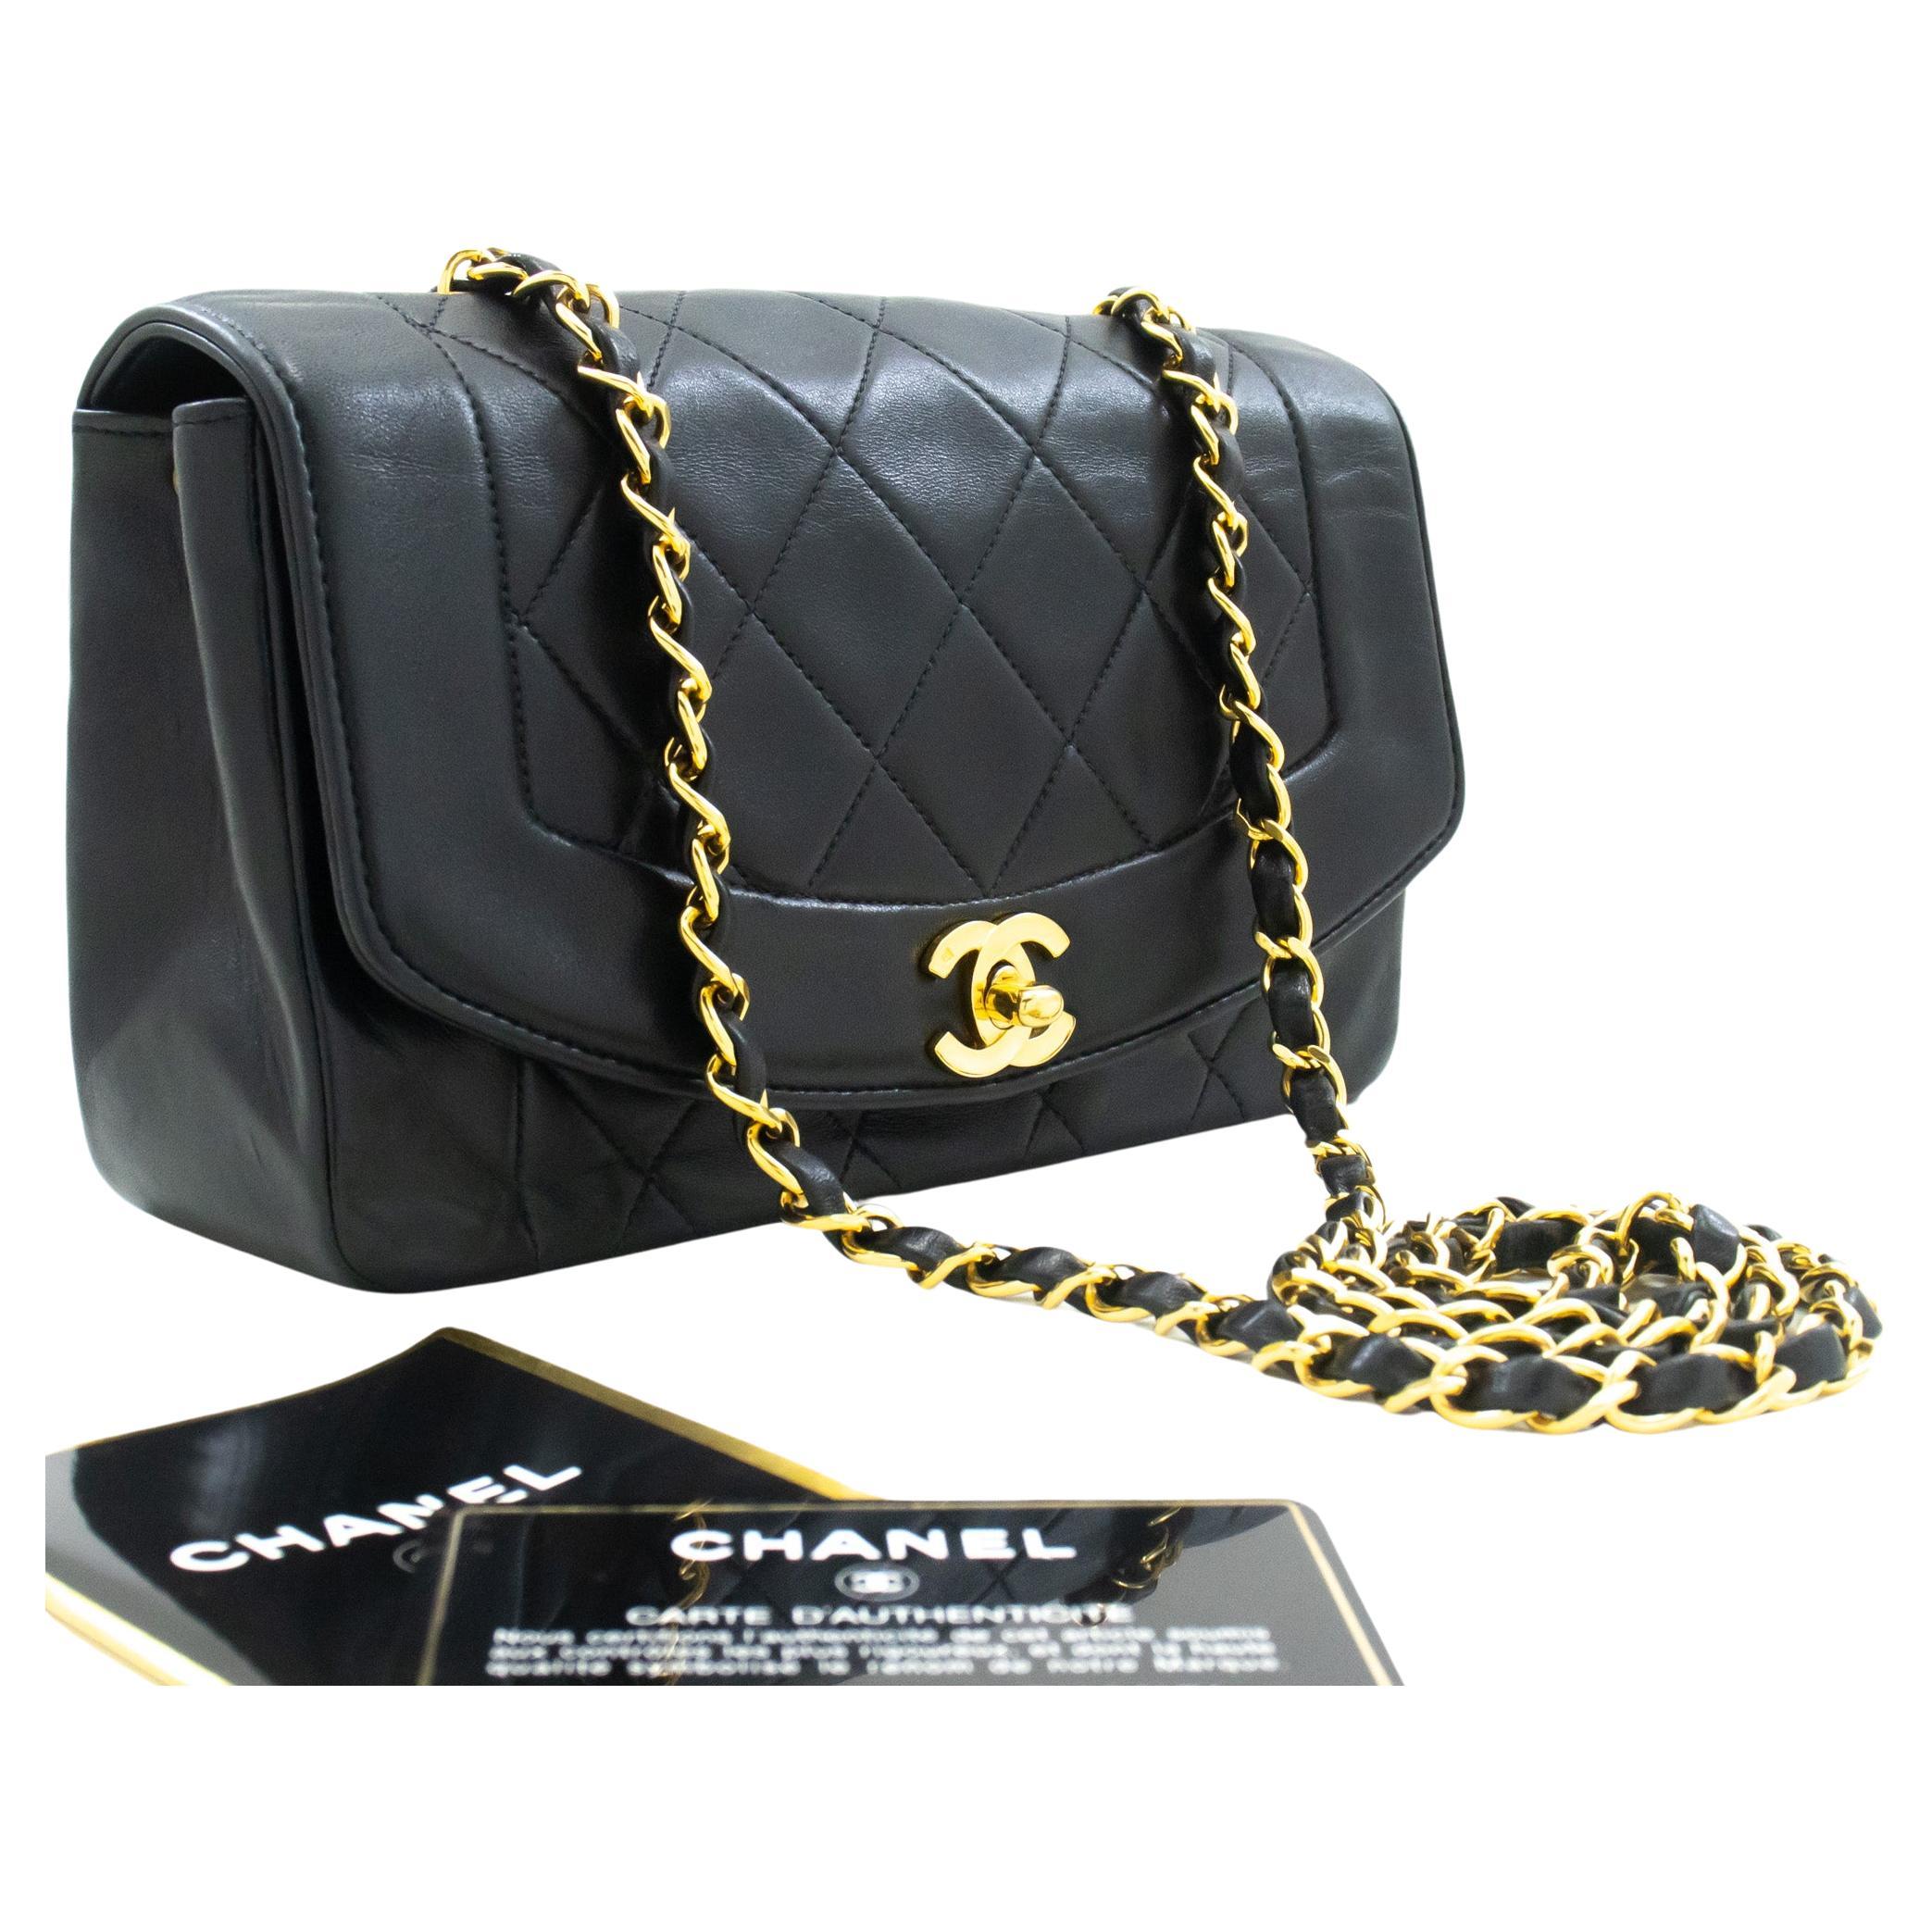 Are Chanel flap bags crossbodies?